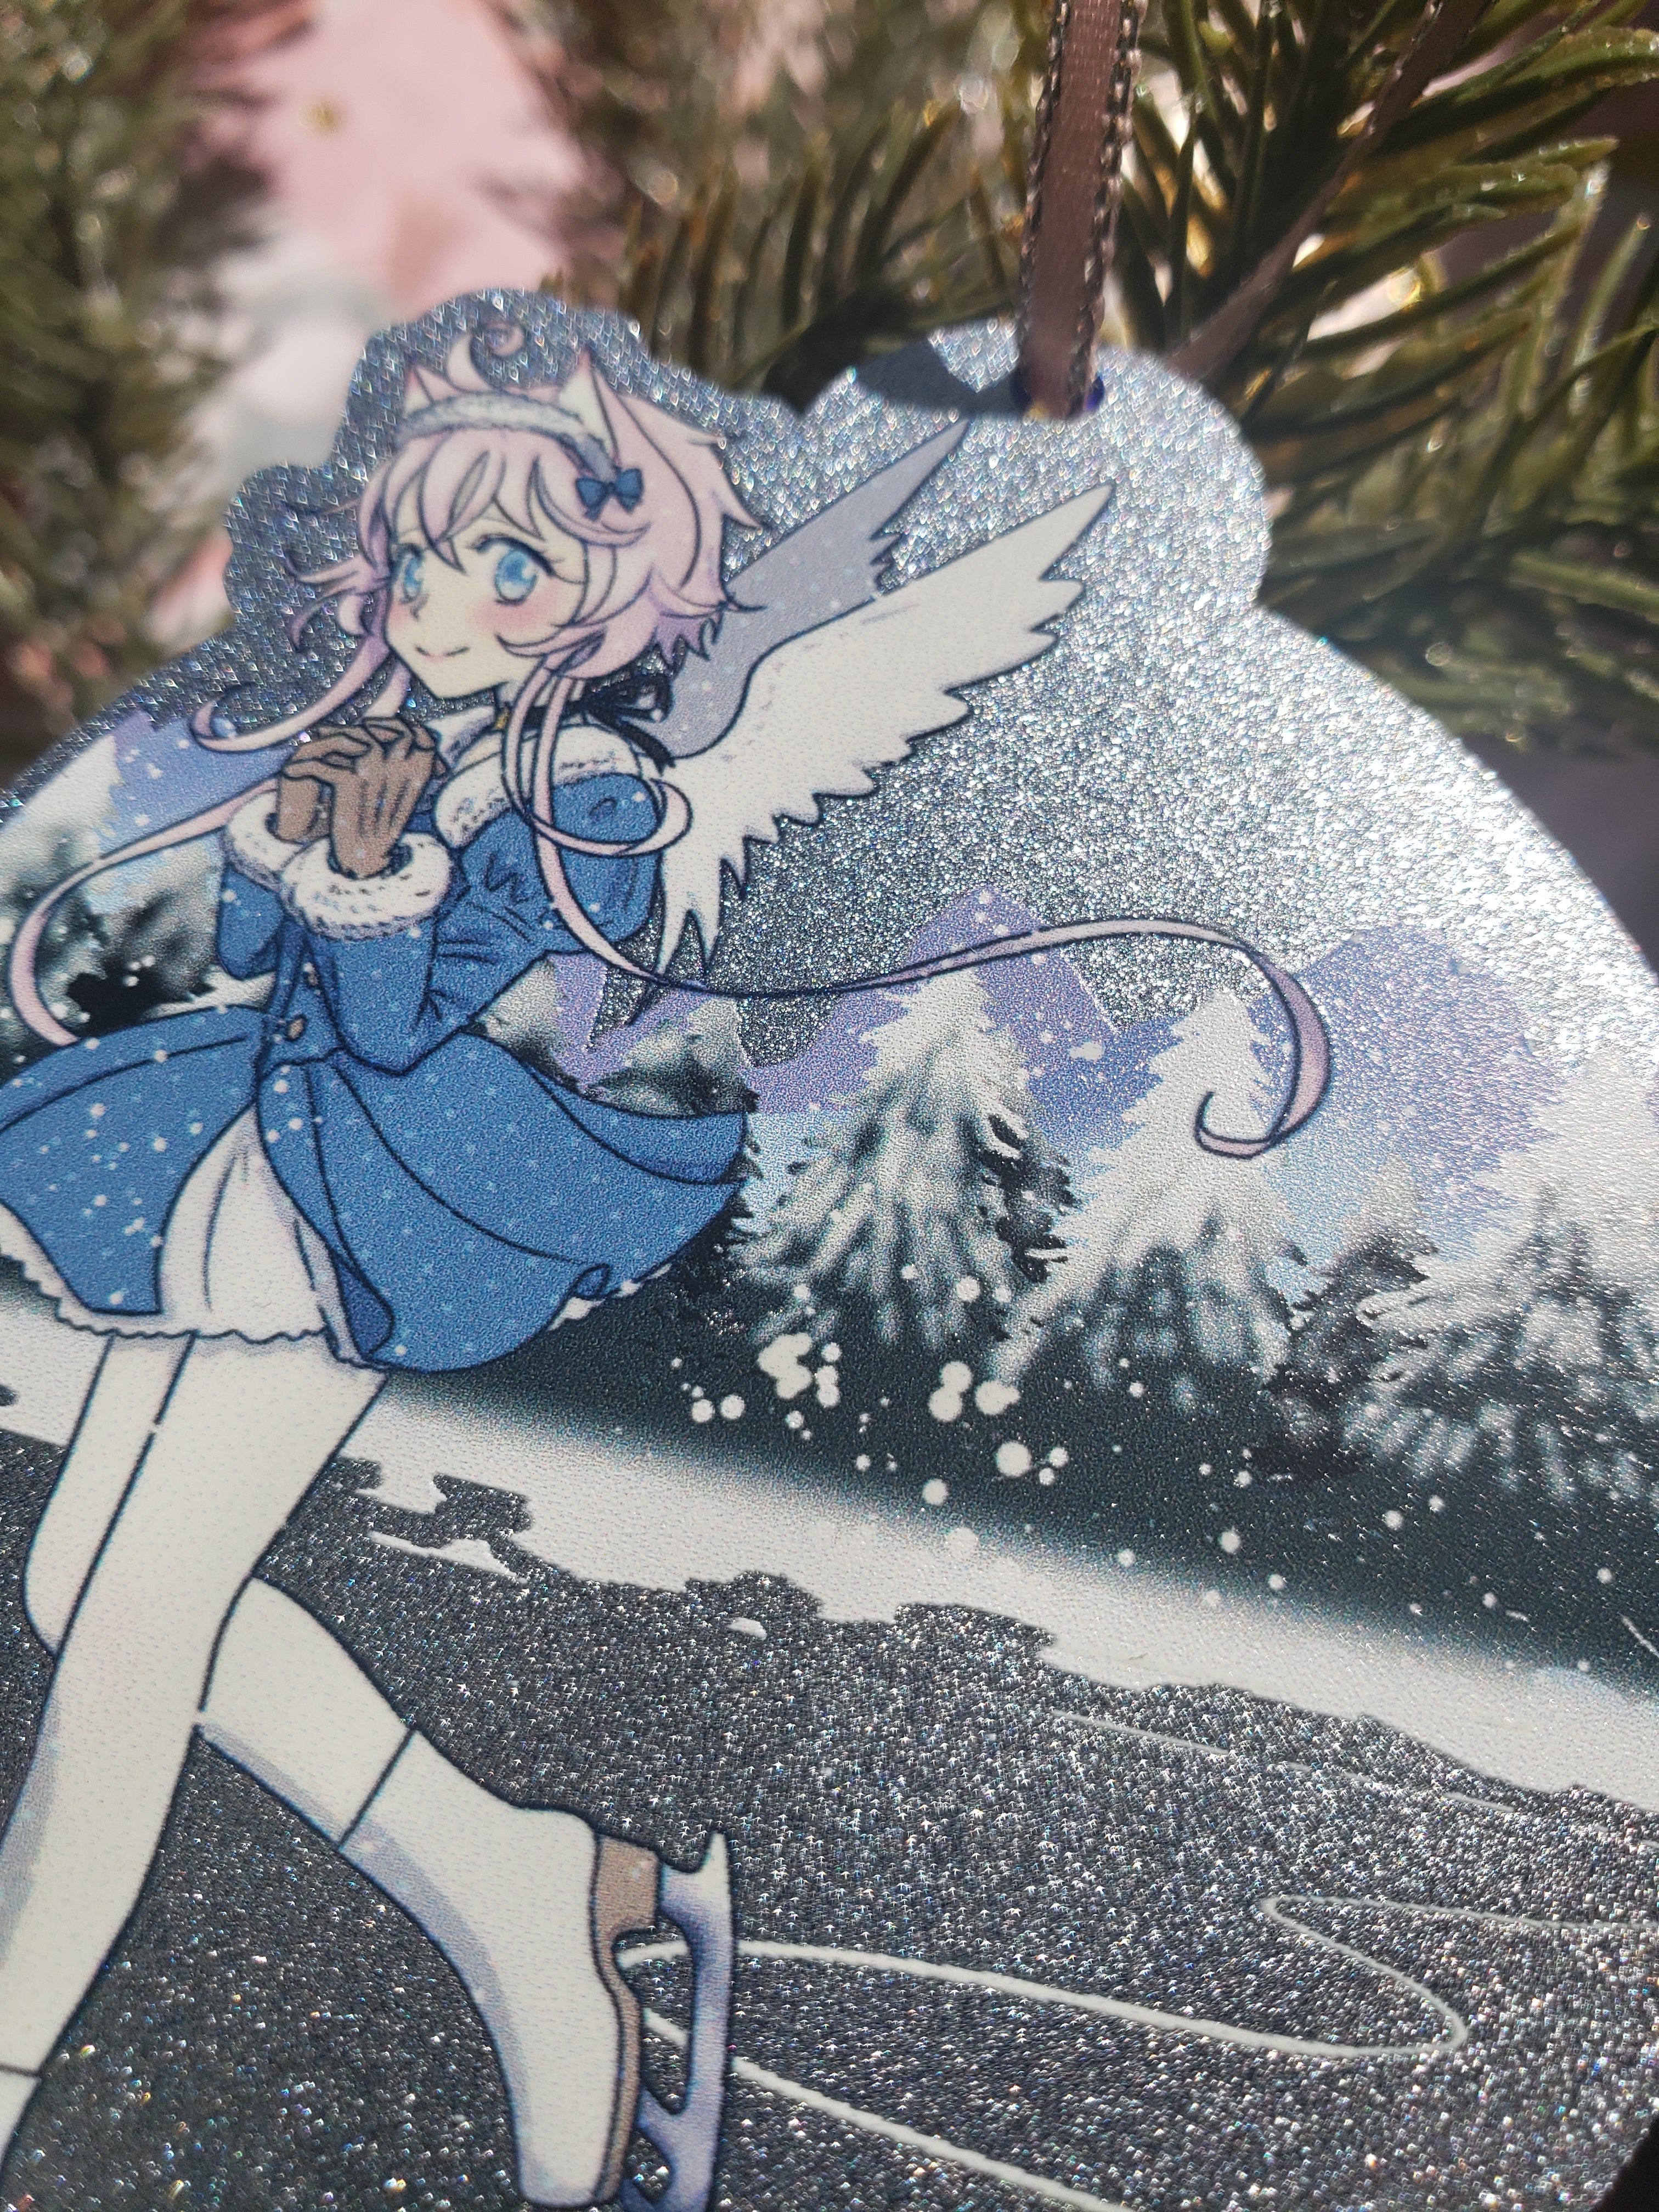 Iceskating snow angel ornament- blue glitter arcylic holiday decoration featuring character from Magical Princess Sky original manga